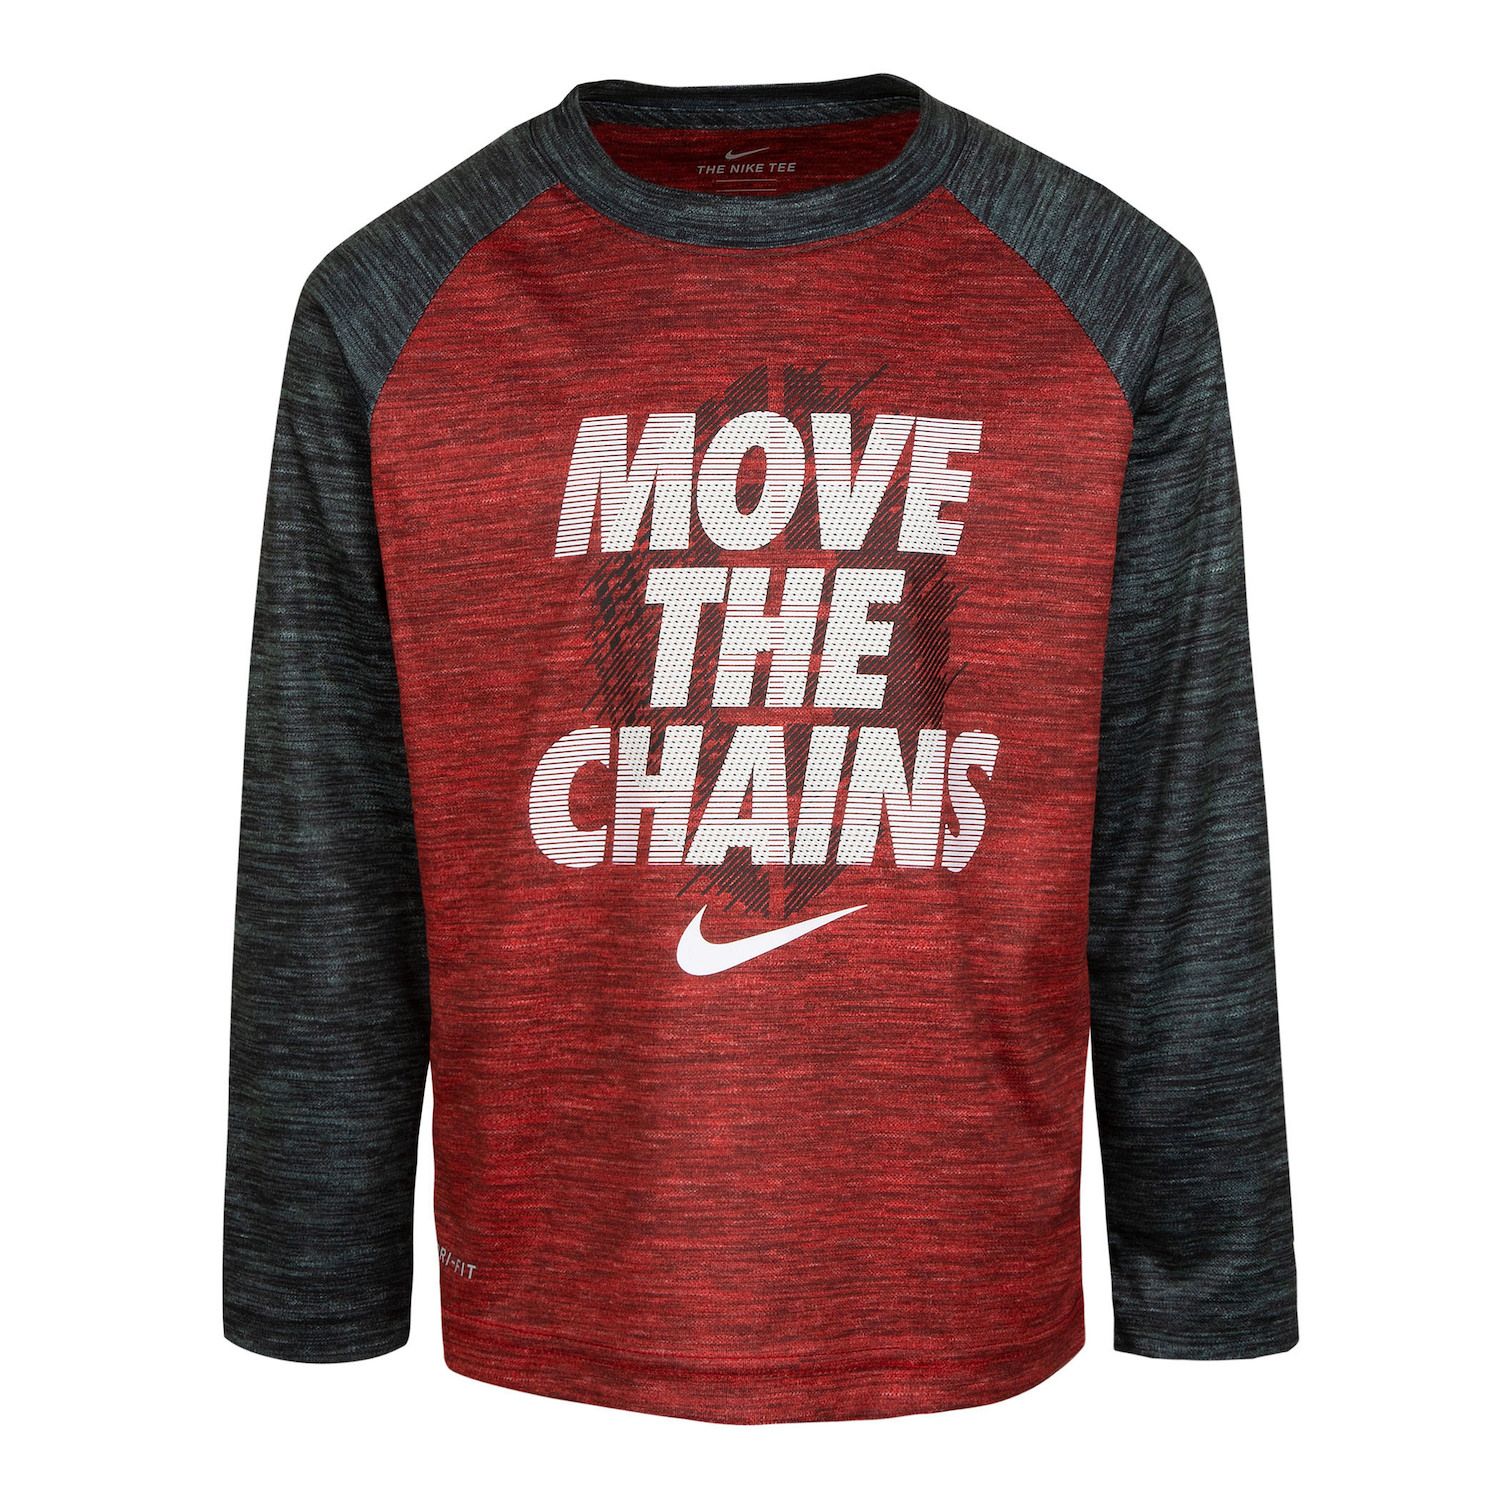 toddler boy nike clothes clearance